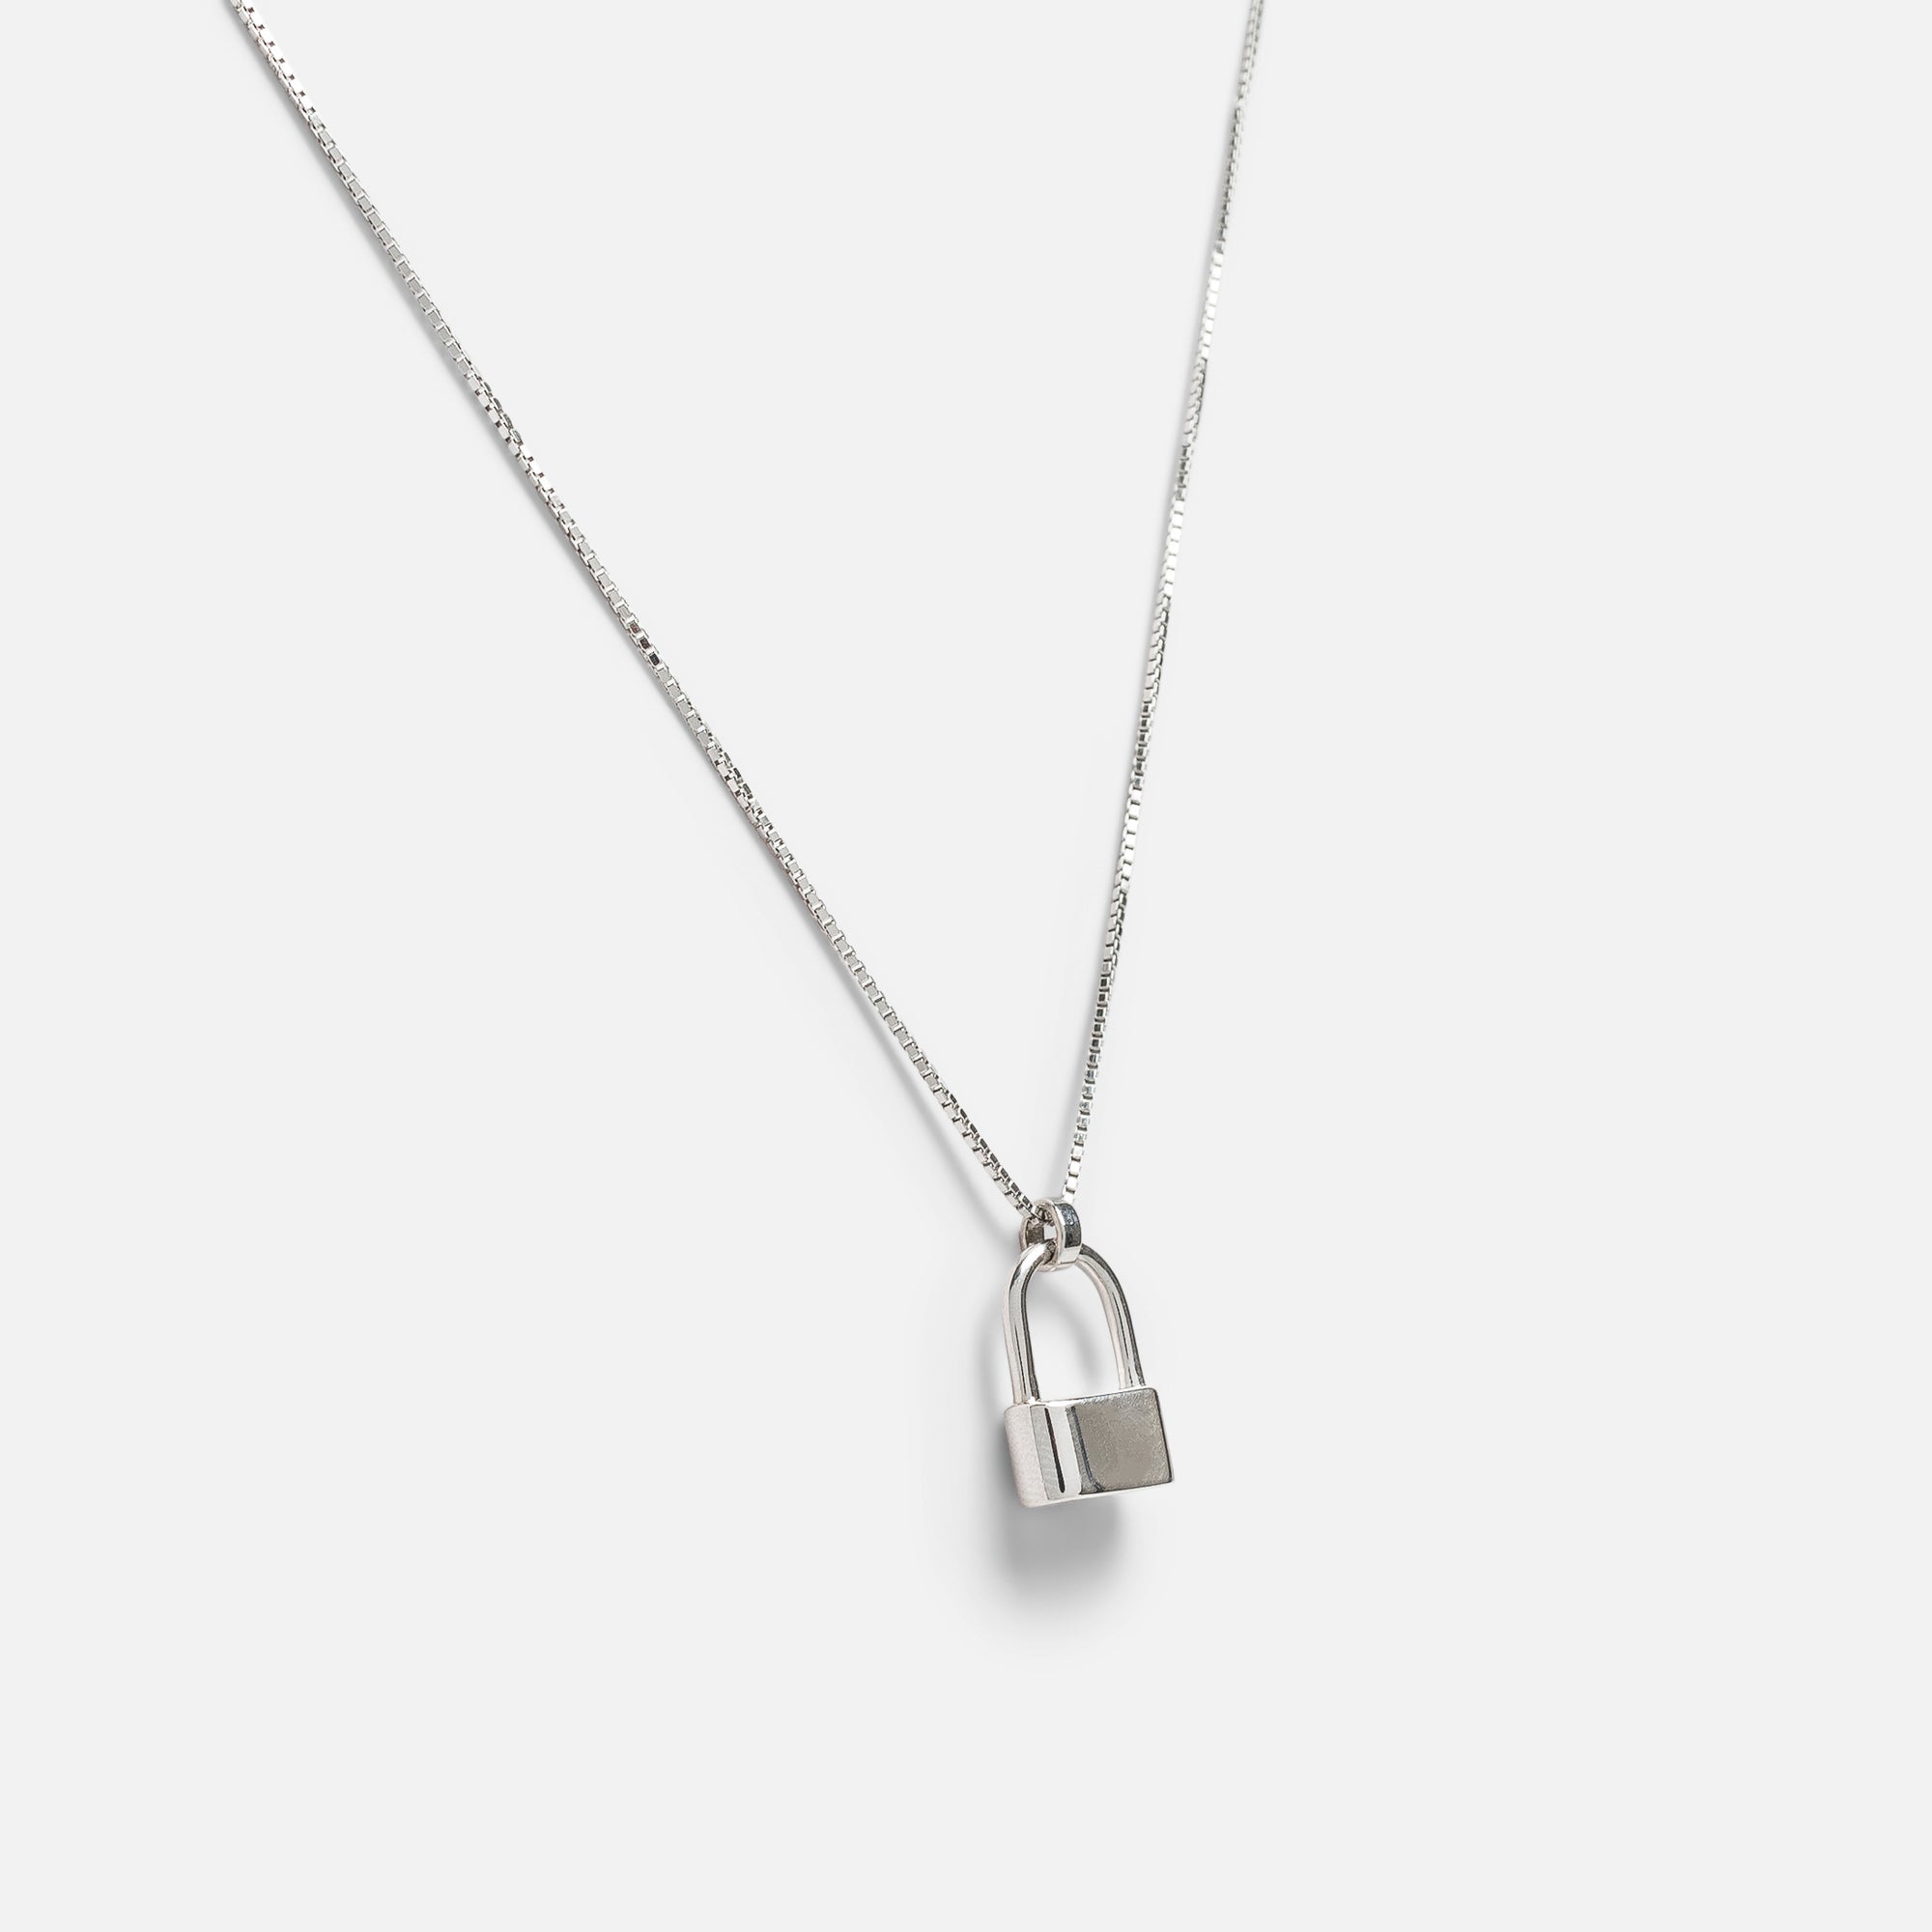 Sterling silver chain with padlock charm